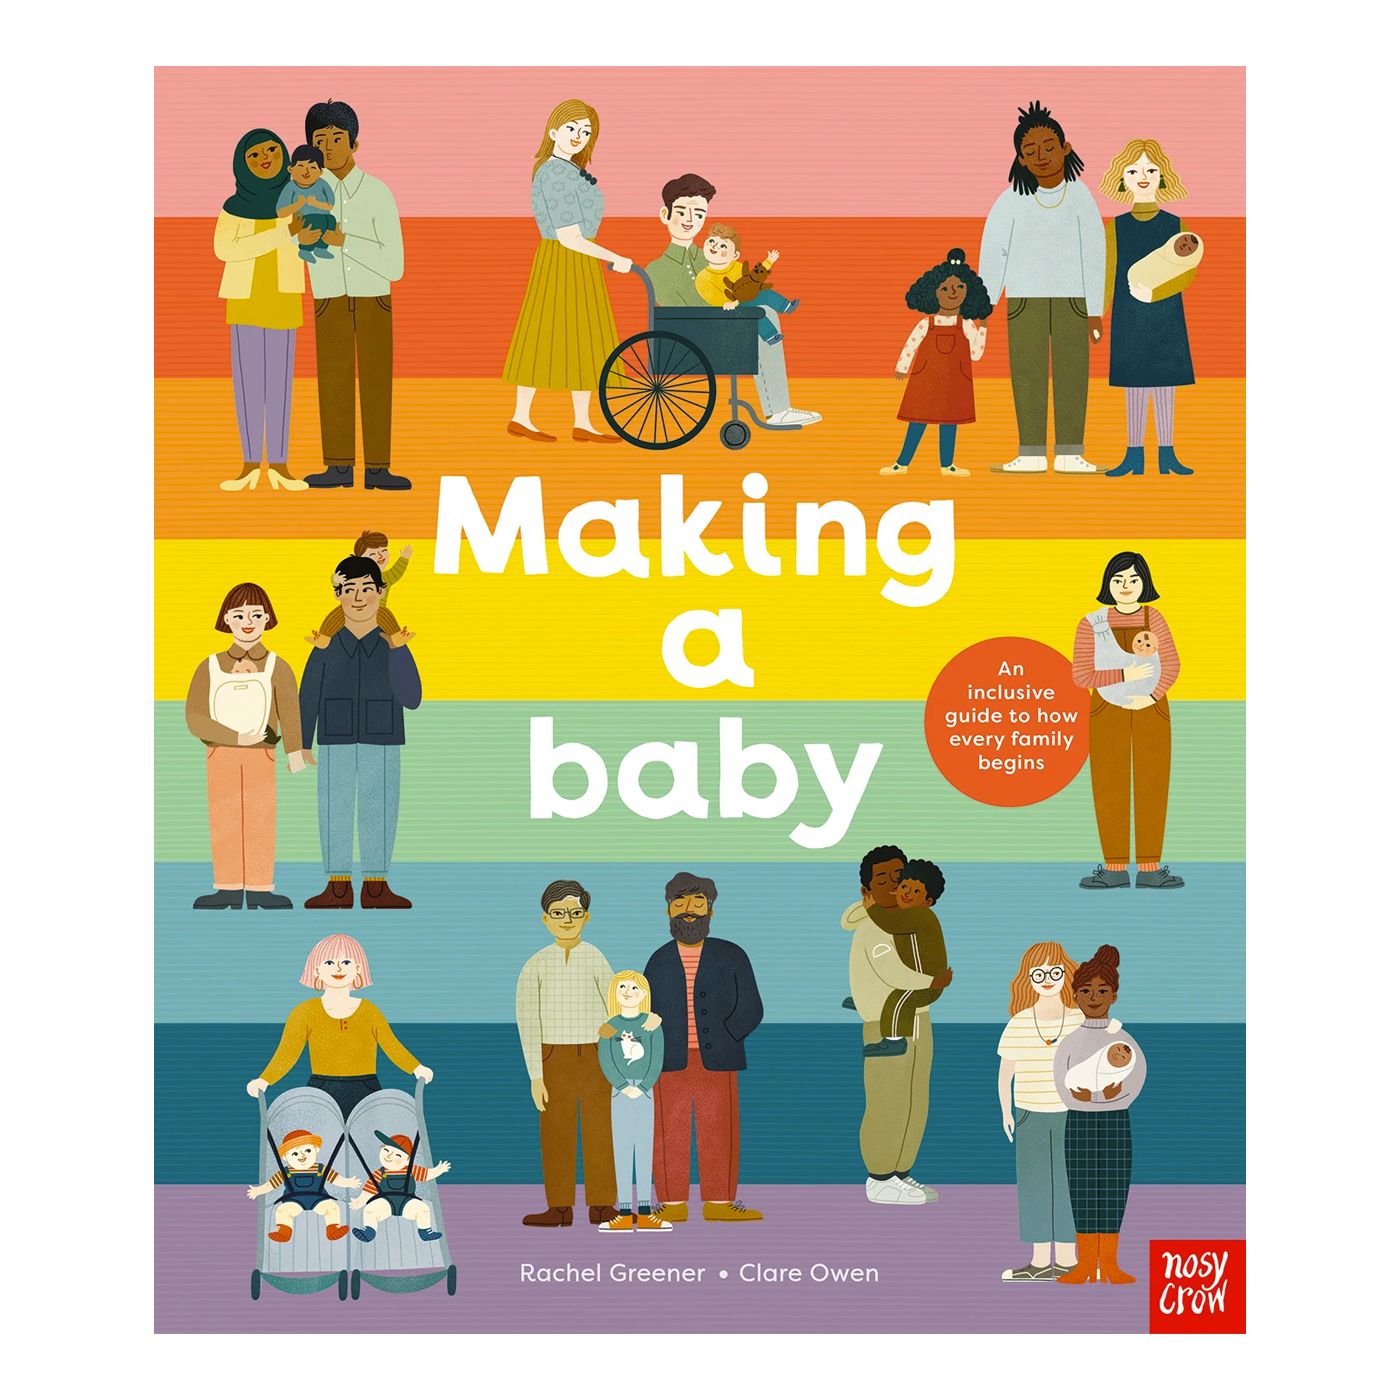  Making A Baby An Inclusive Guide to How Every Family Begins